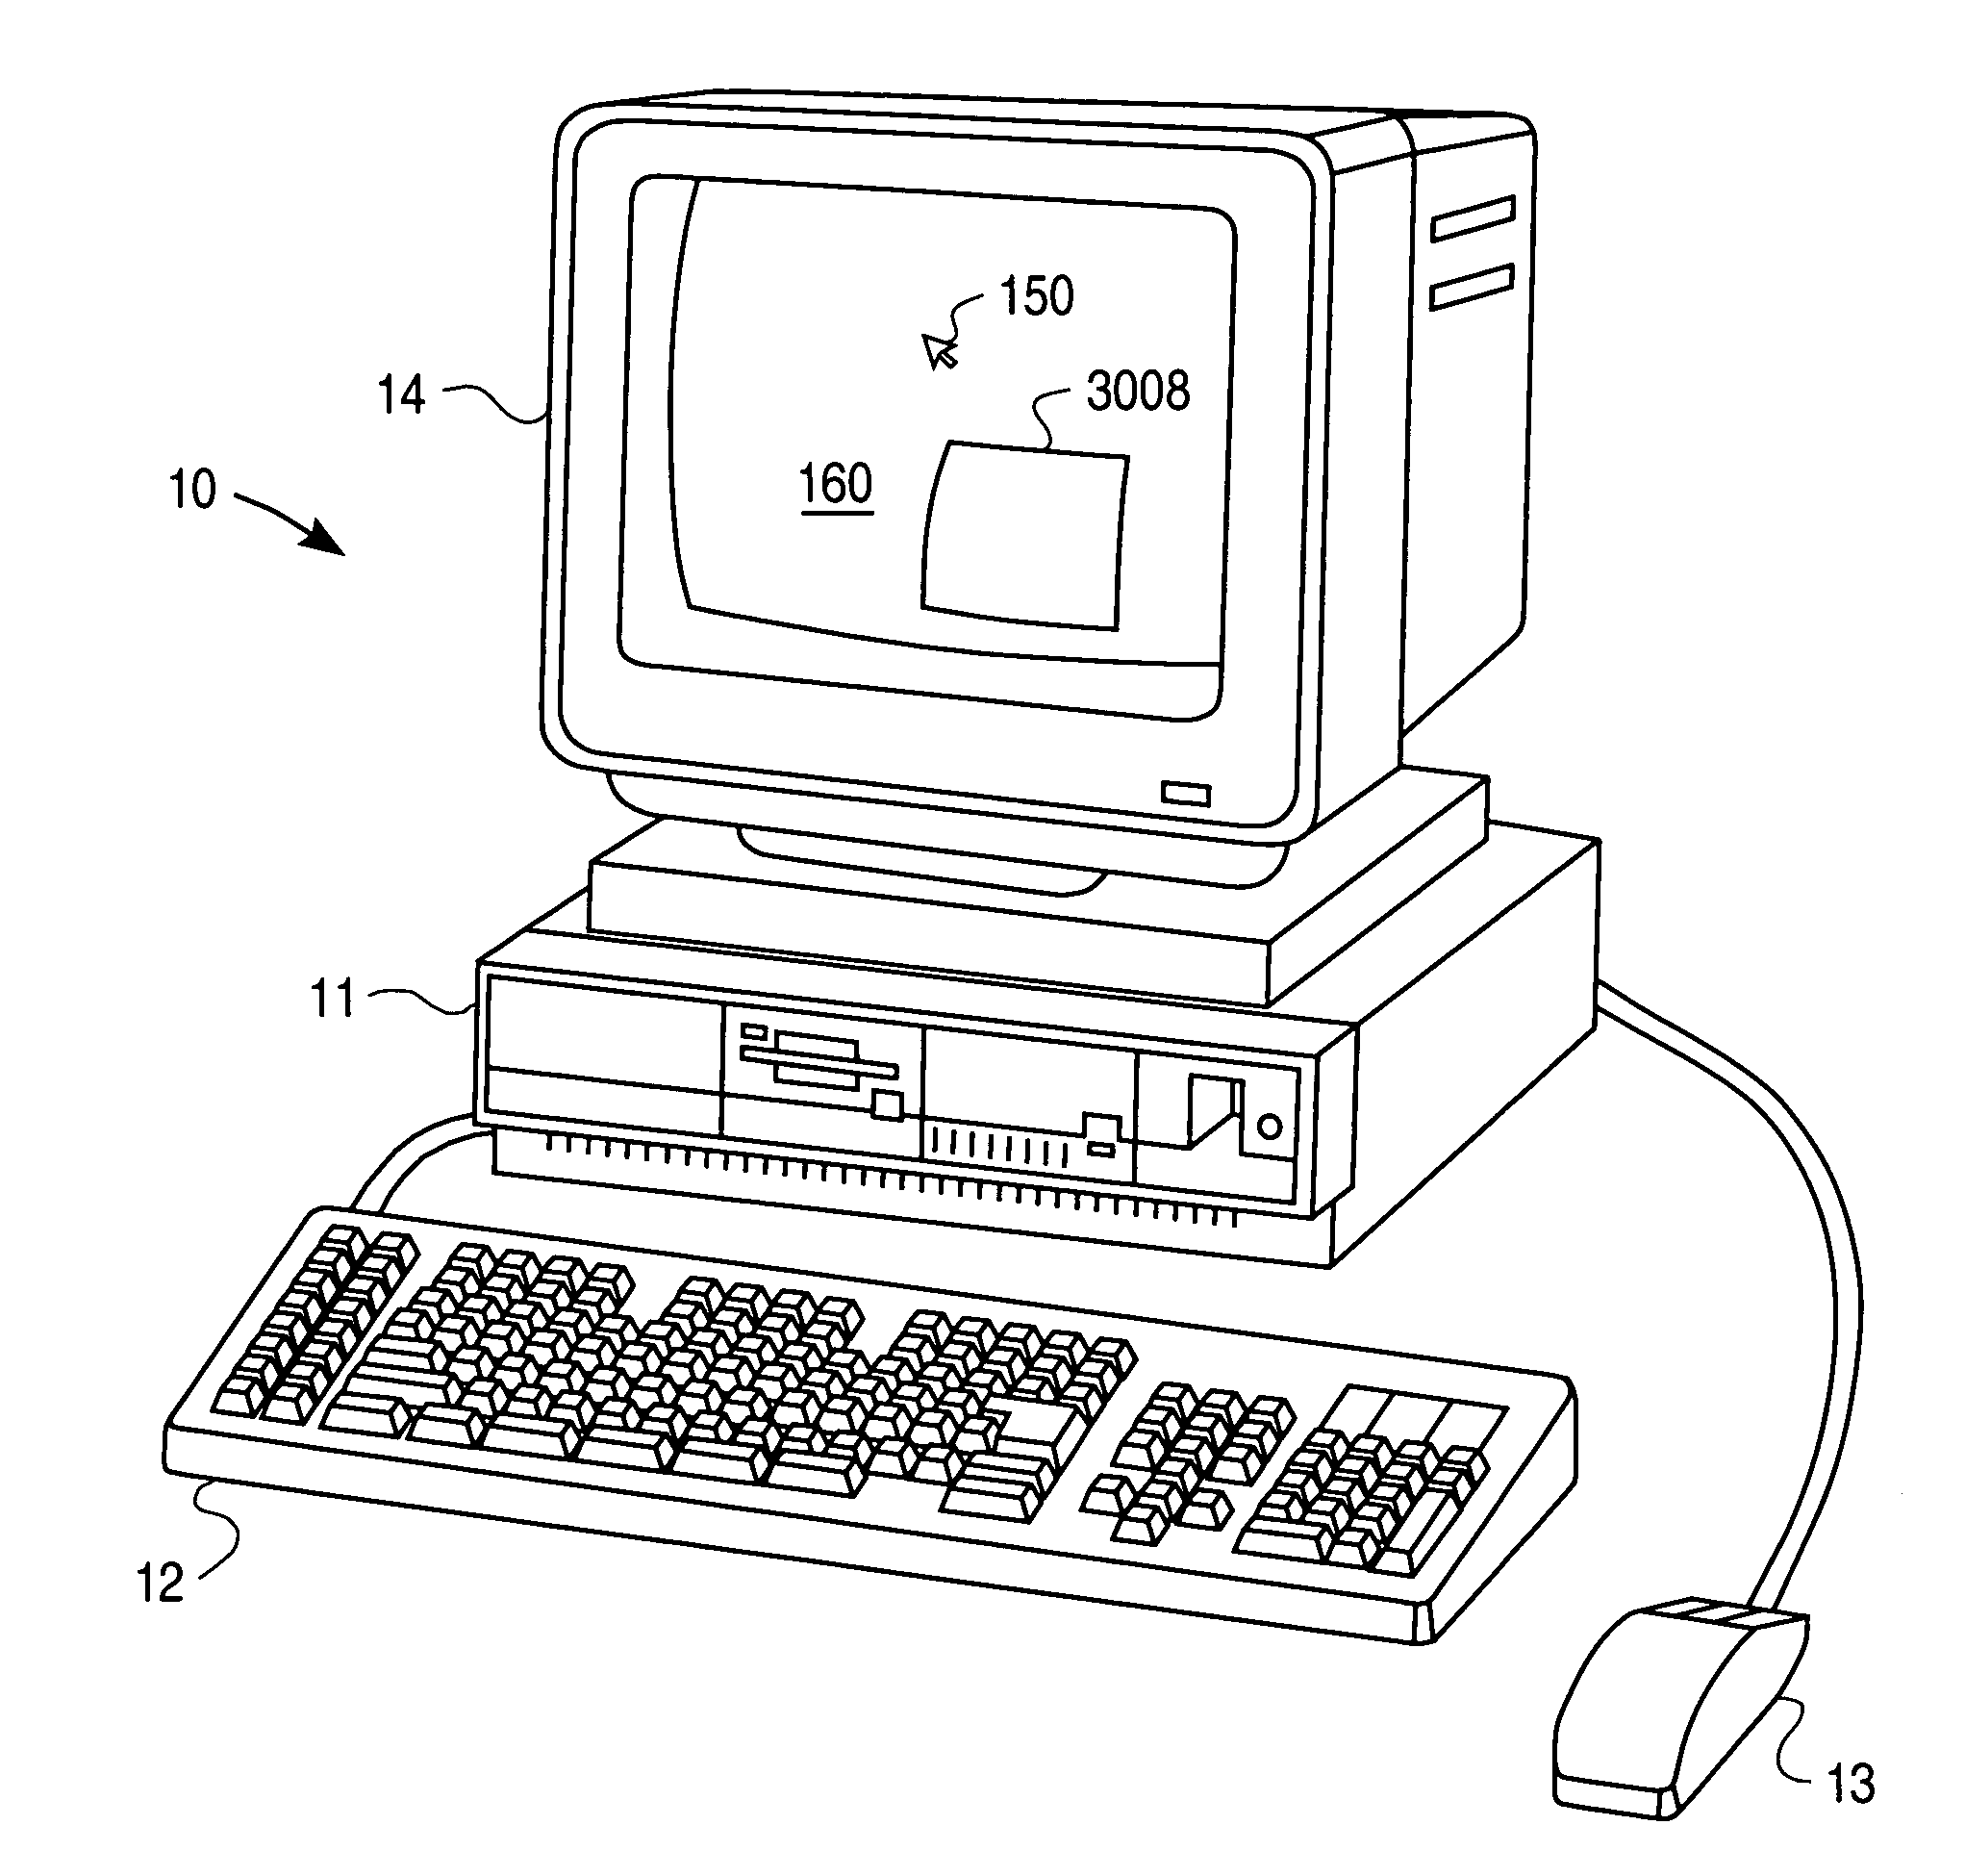 Apparatus and method for TOL client boundary protection